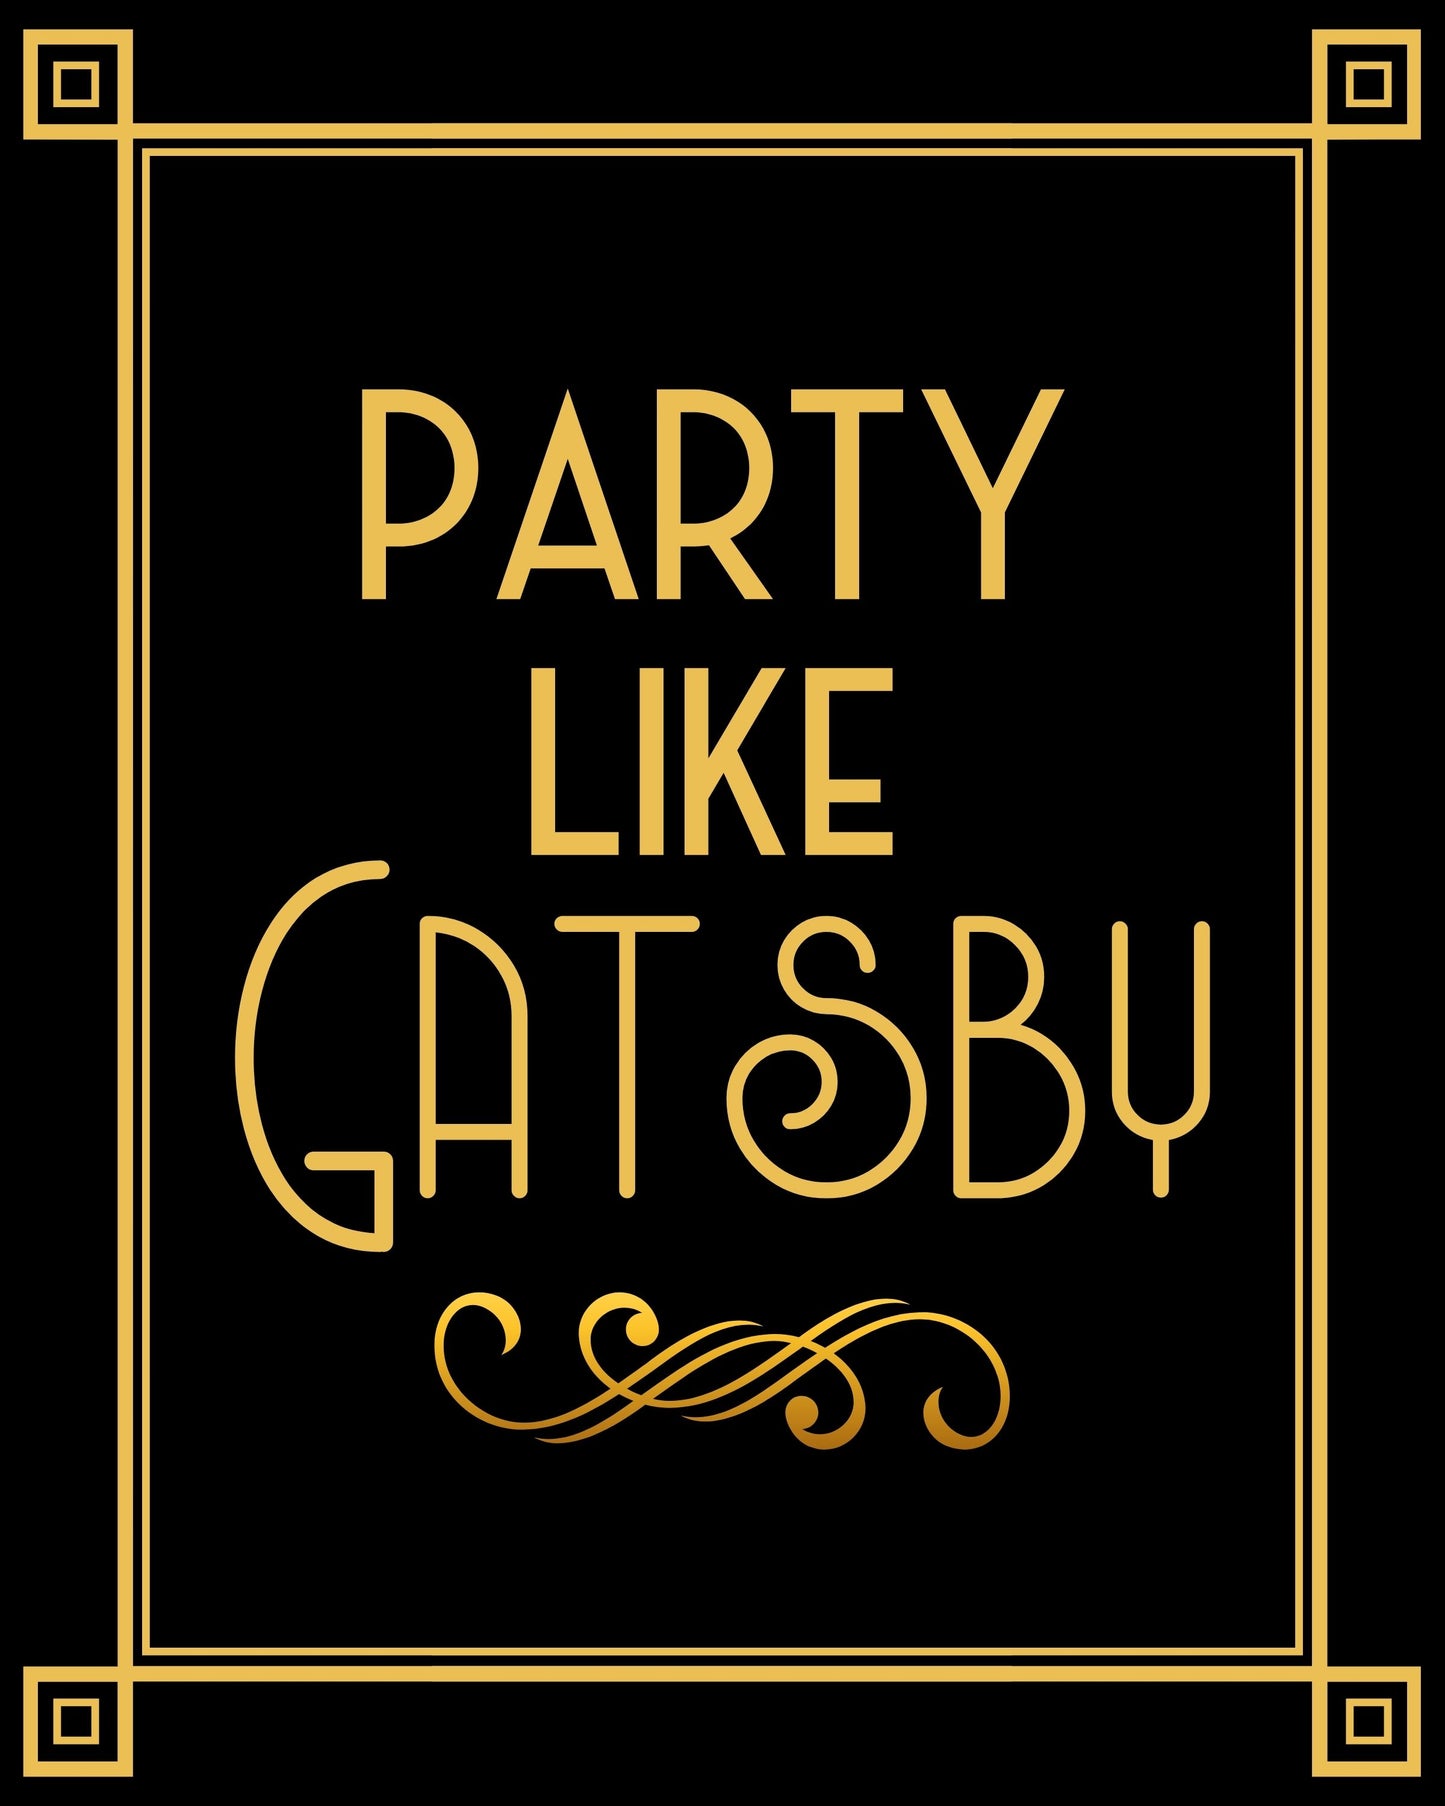 "Party Like Gatsby" Printable Party Sign For Great Gatsby or Roaring 20's Party Or Wedding, Black & Gold, Printable Party Decor